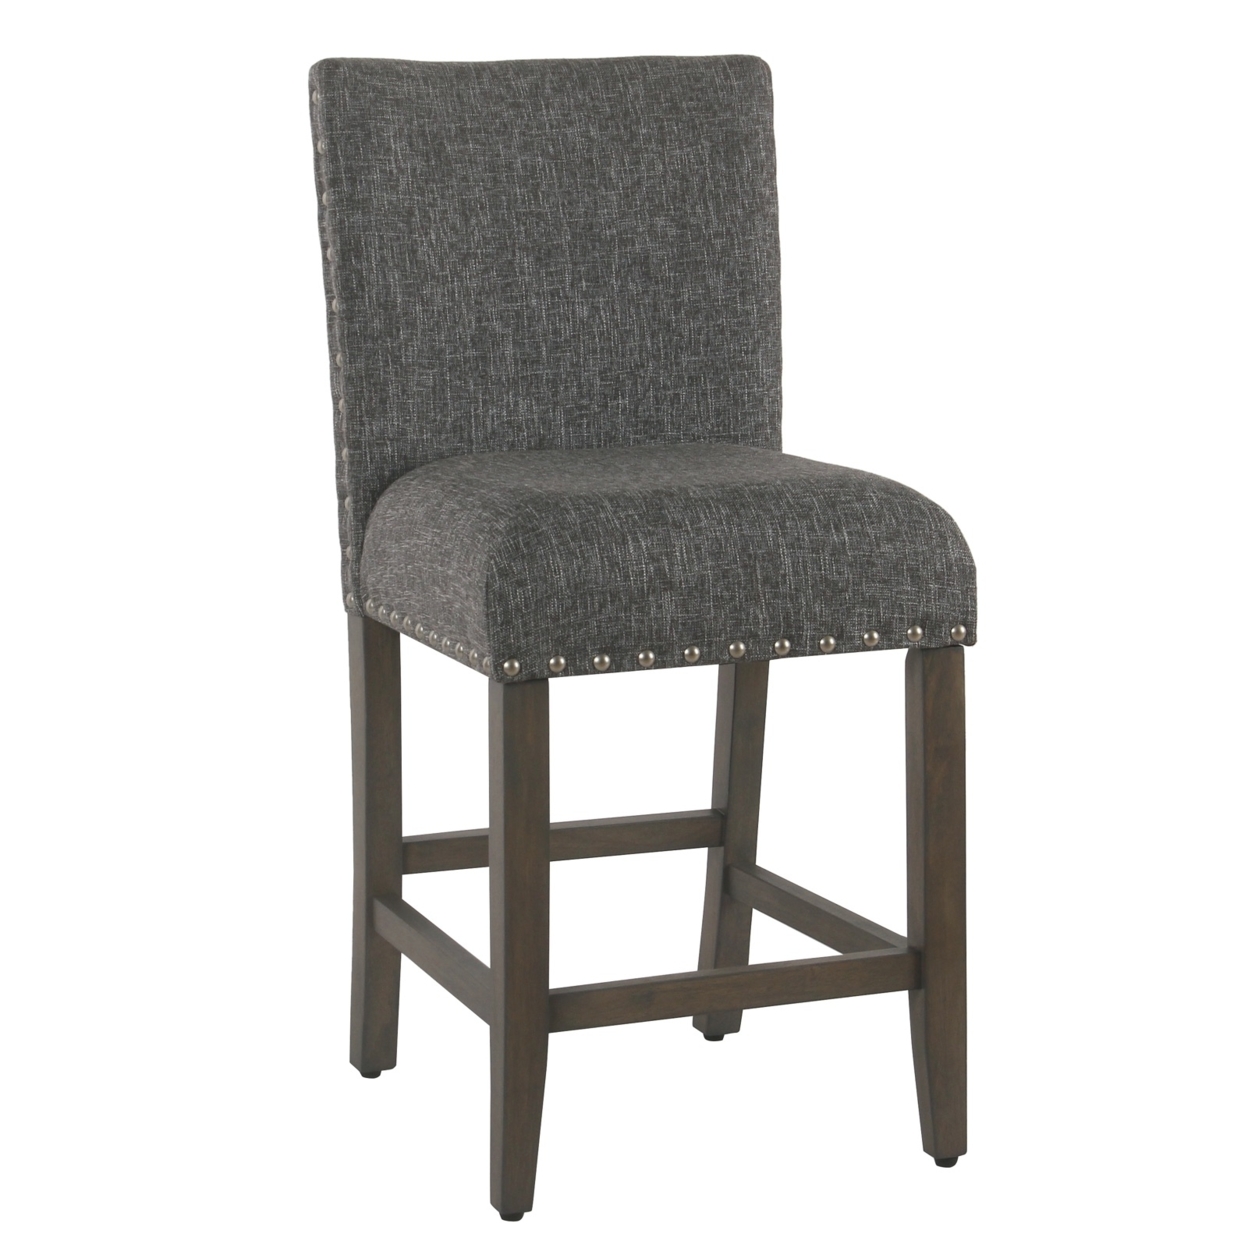 Fabric Upholstered Wooden Counter Height Stool With Nail Head Trim Accent, Dark Gray- Saltoro Sherpi